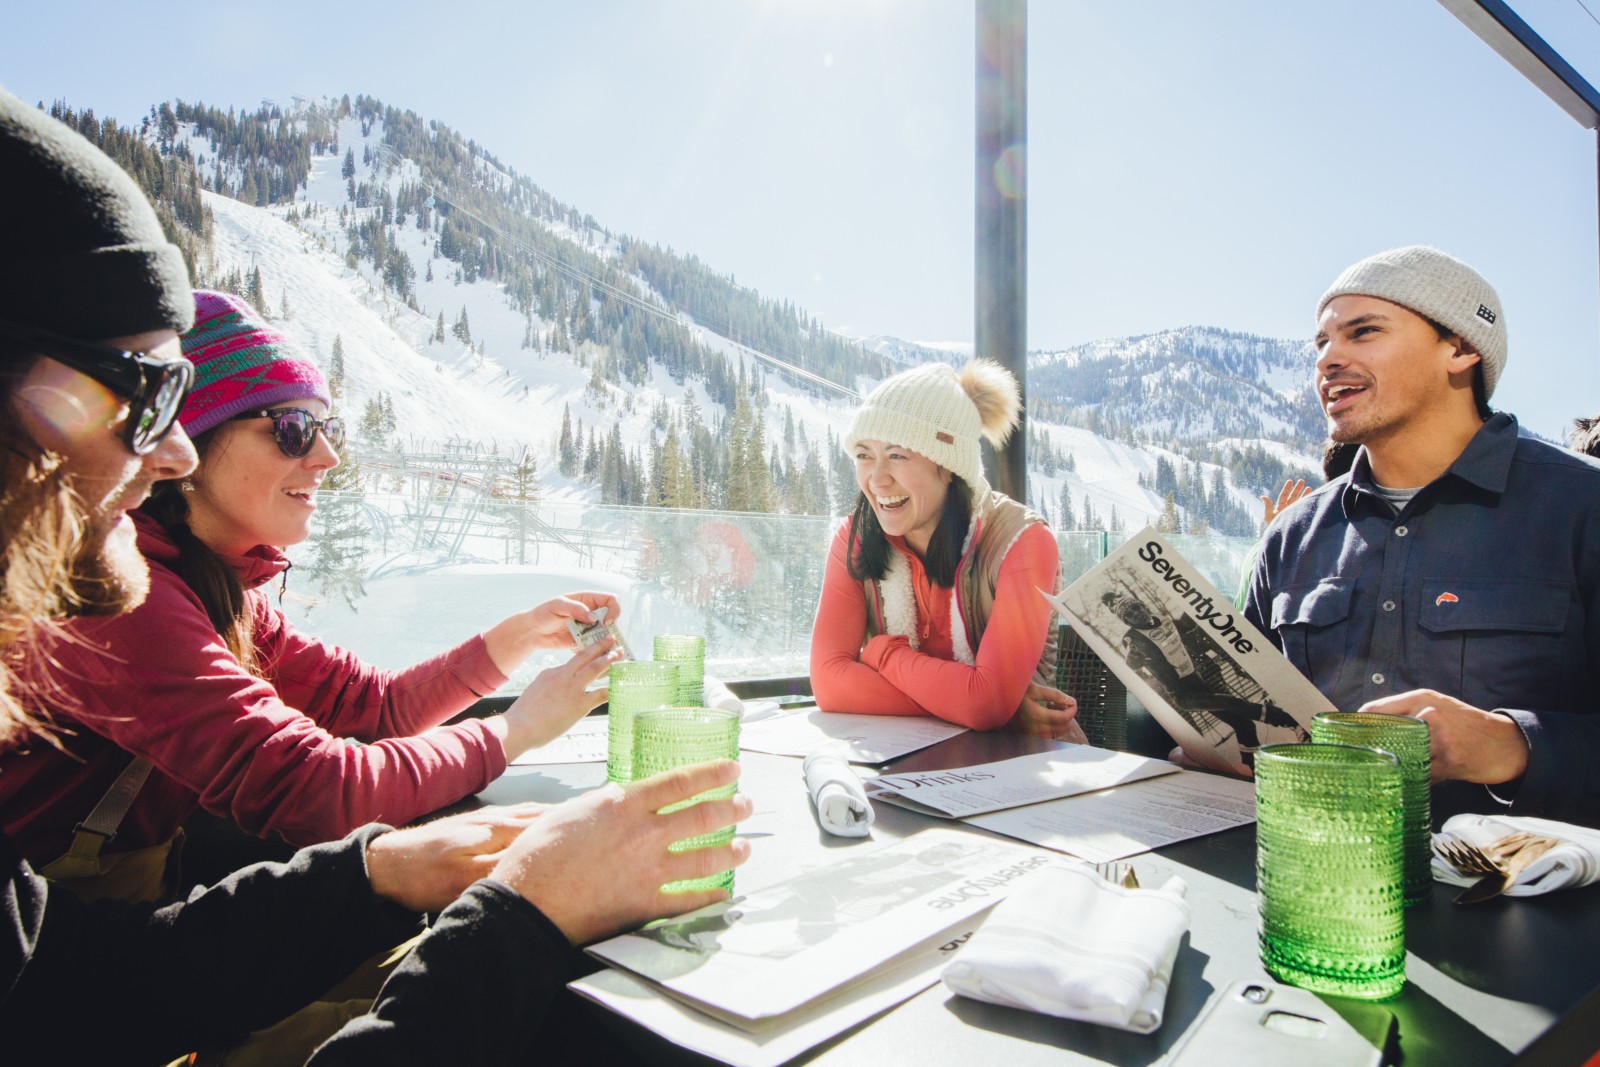 The Best Lunch Options at Snowbird